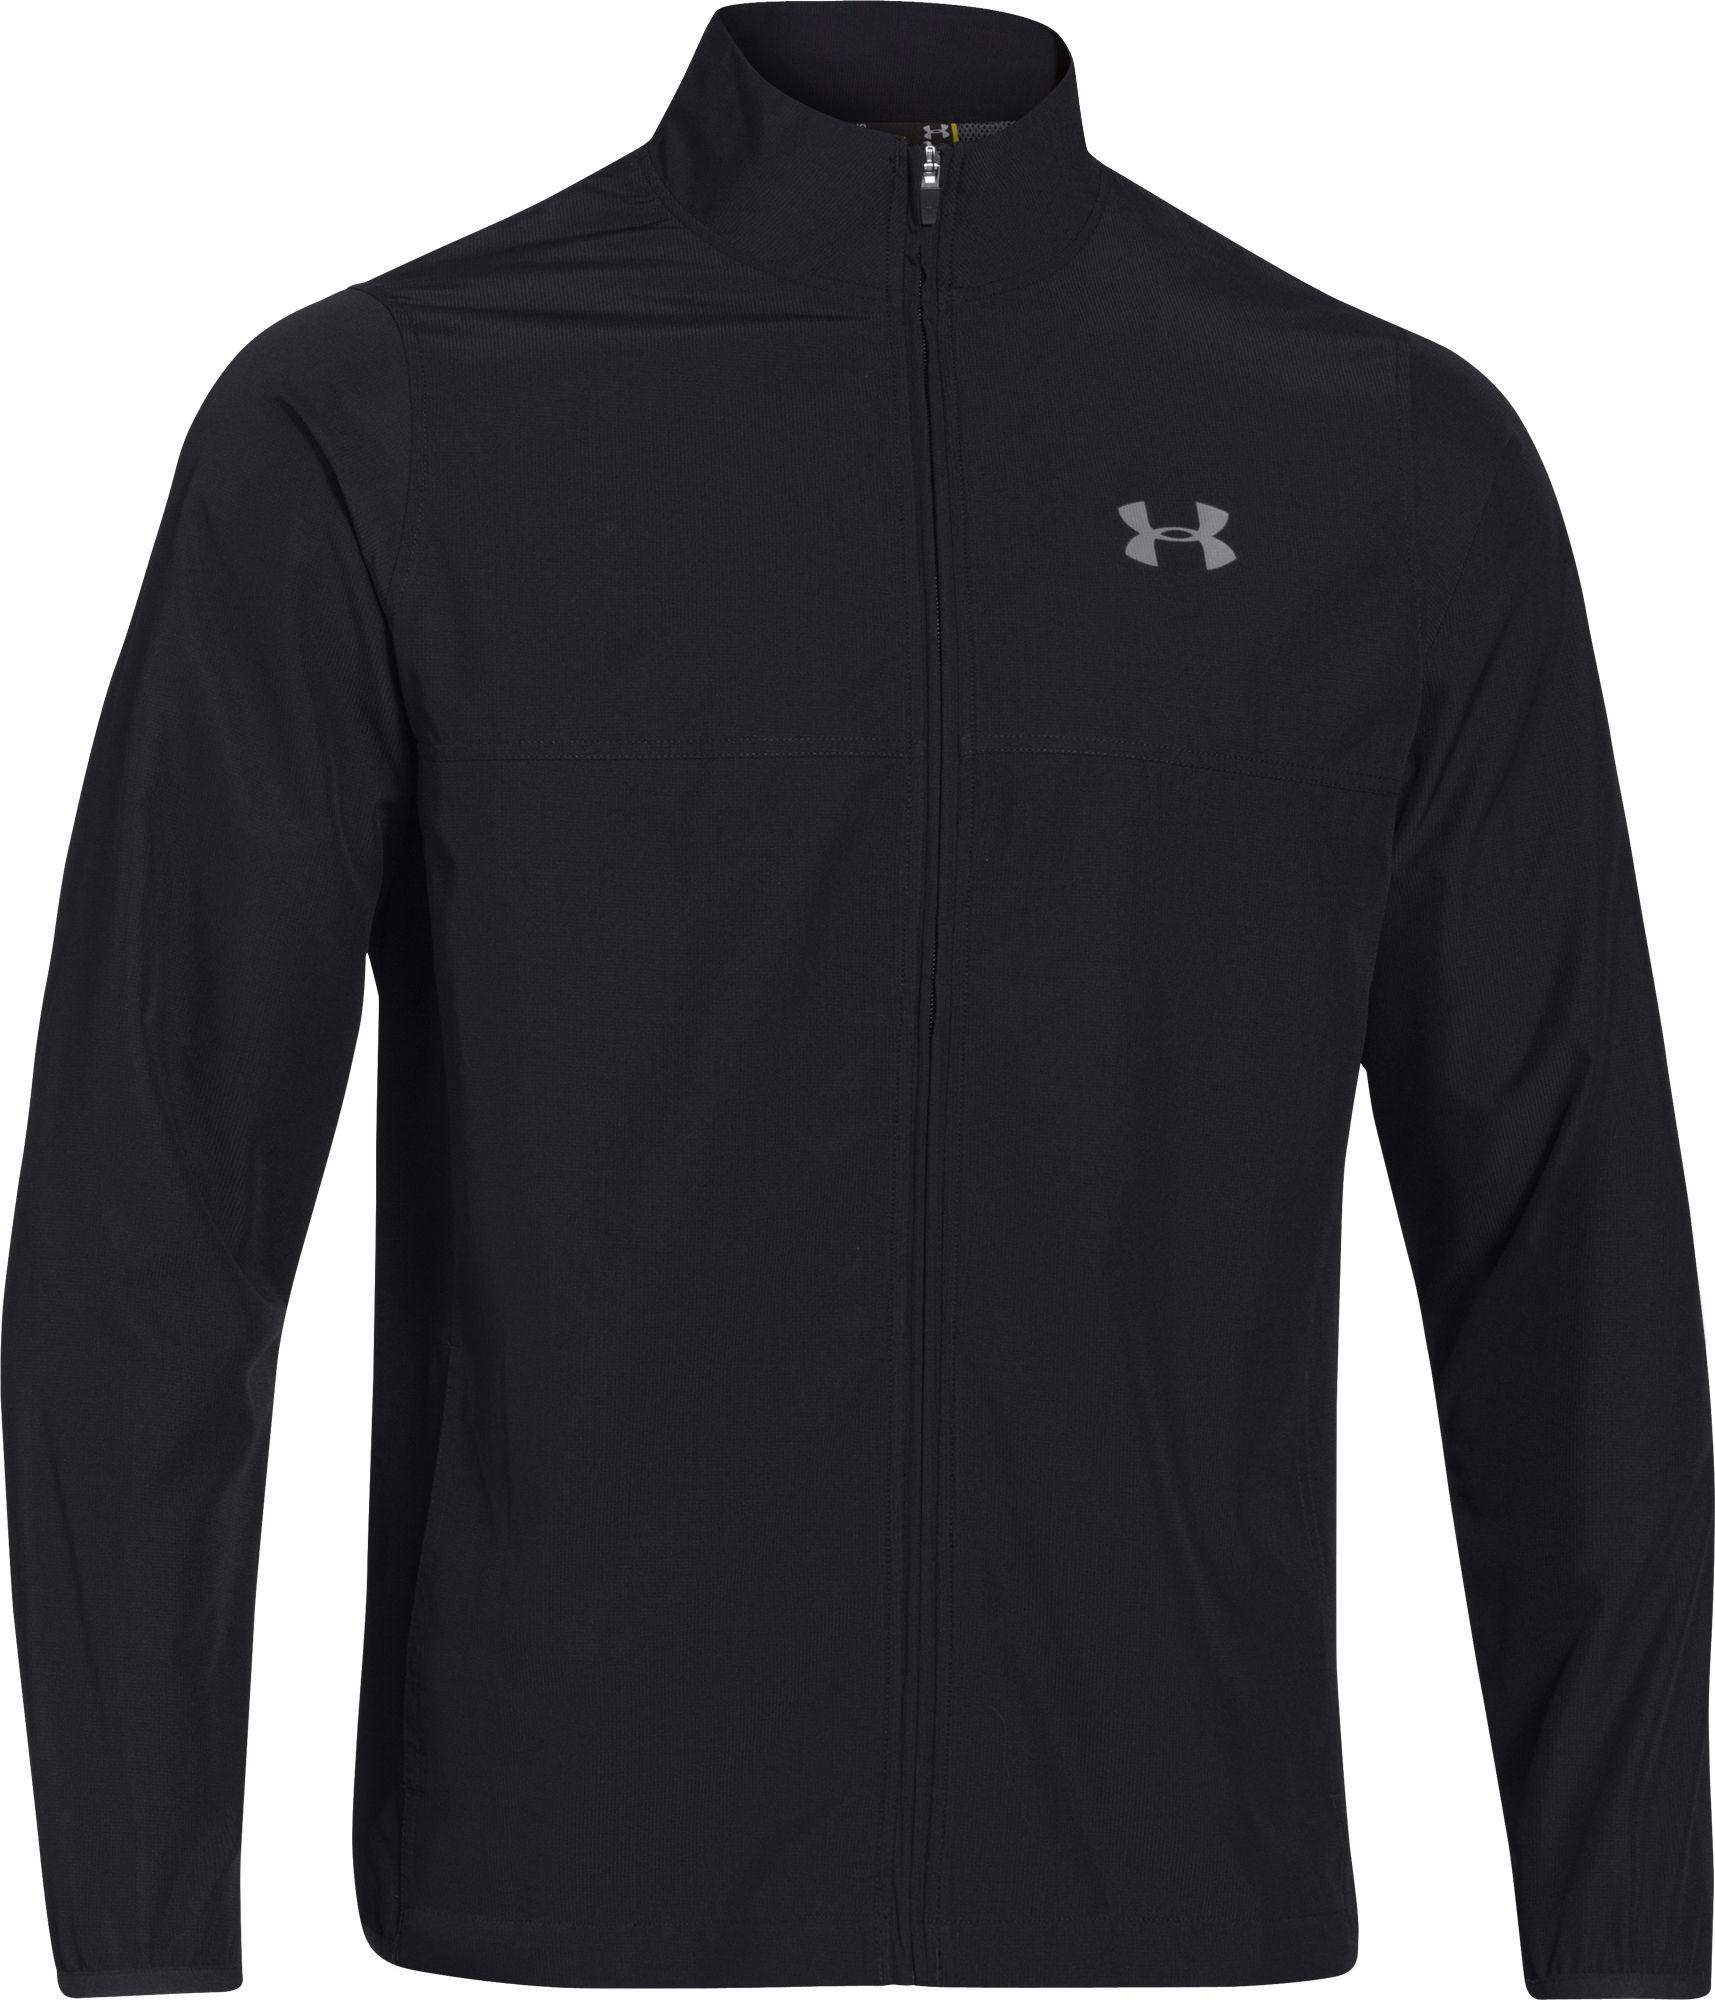 Under Armour Synthetic Vital Warm-up Full Zip Jacket in Black/Black ...